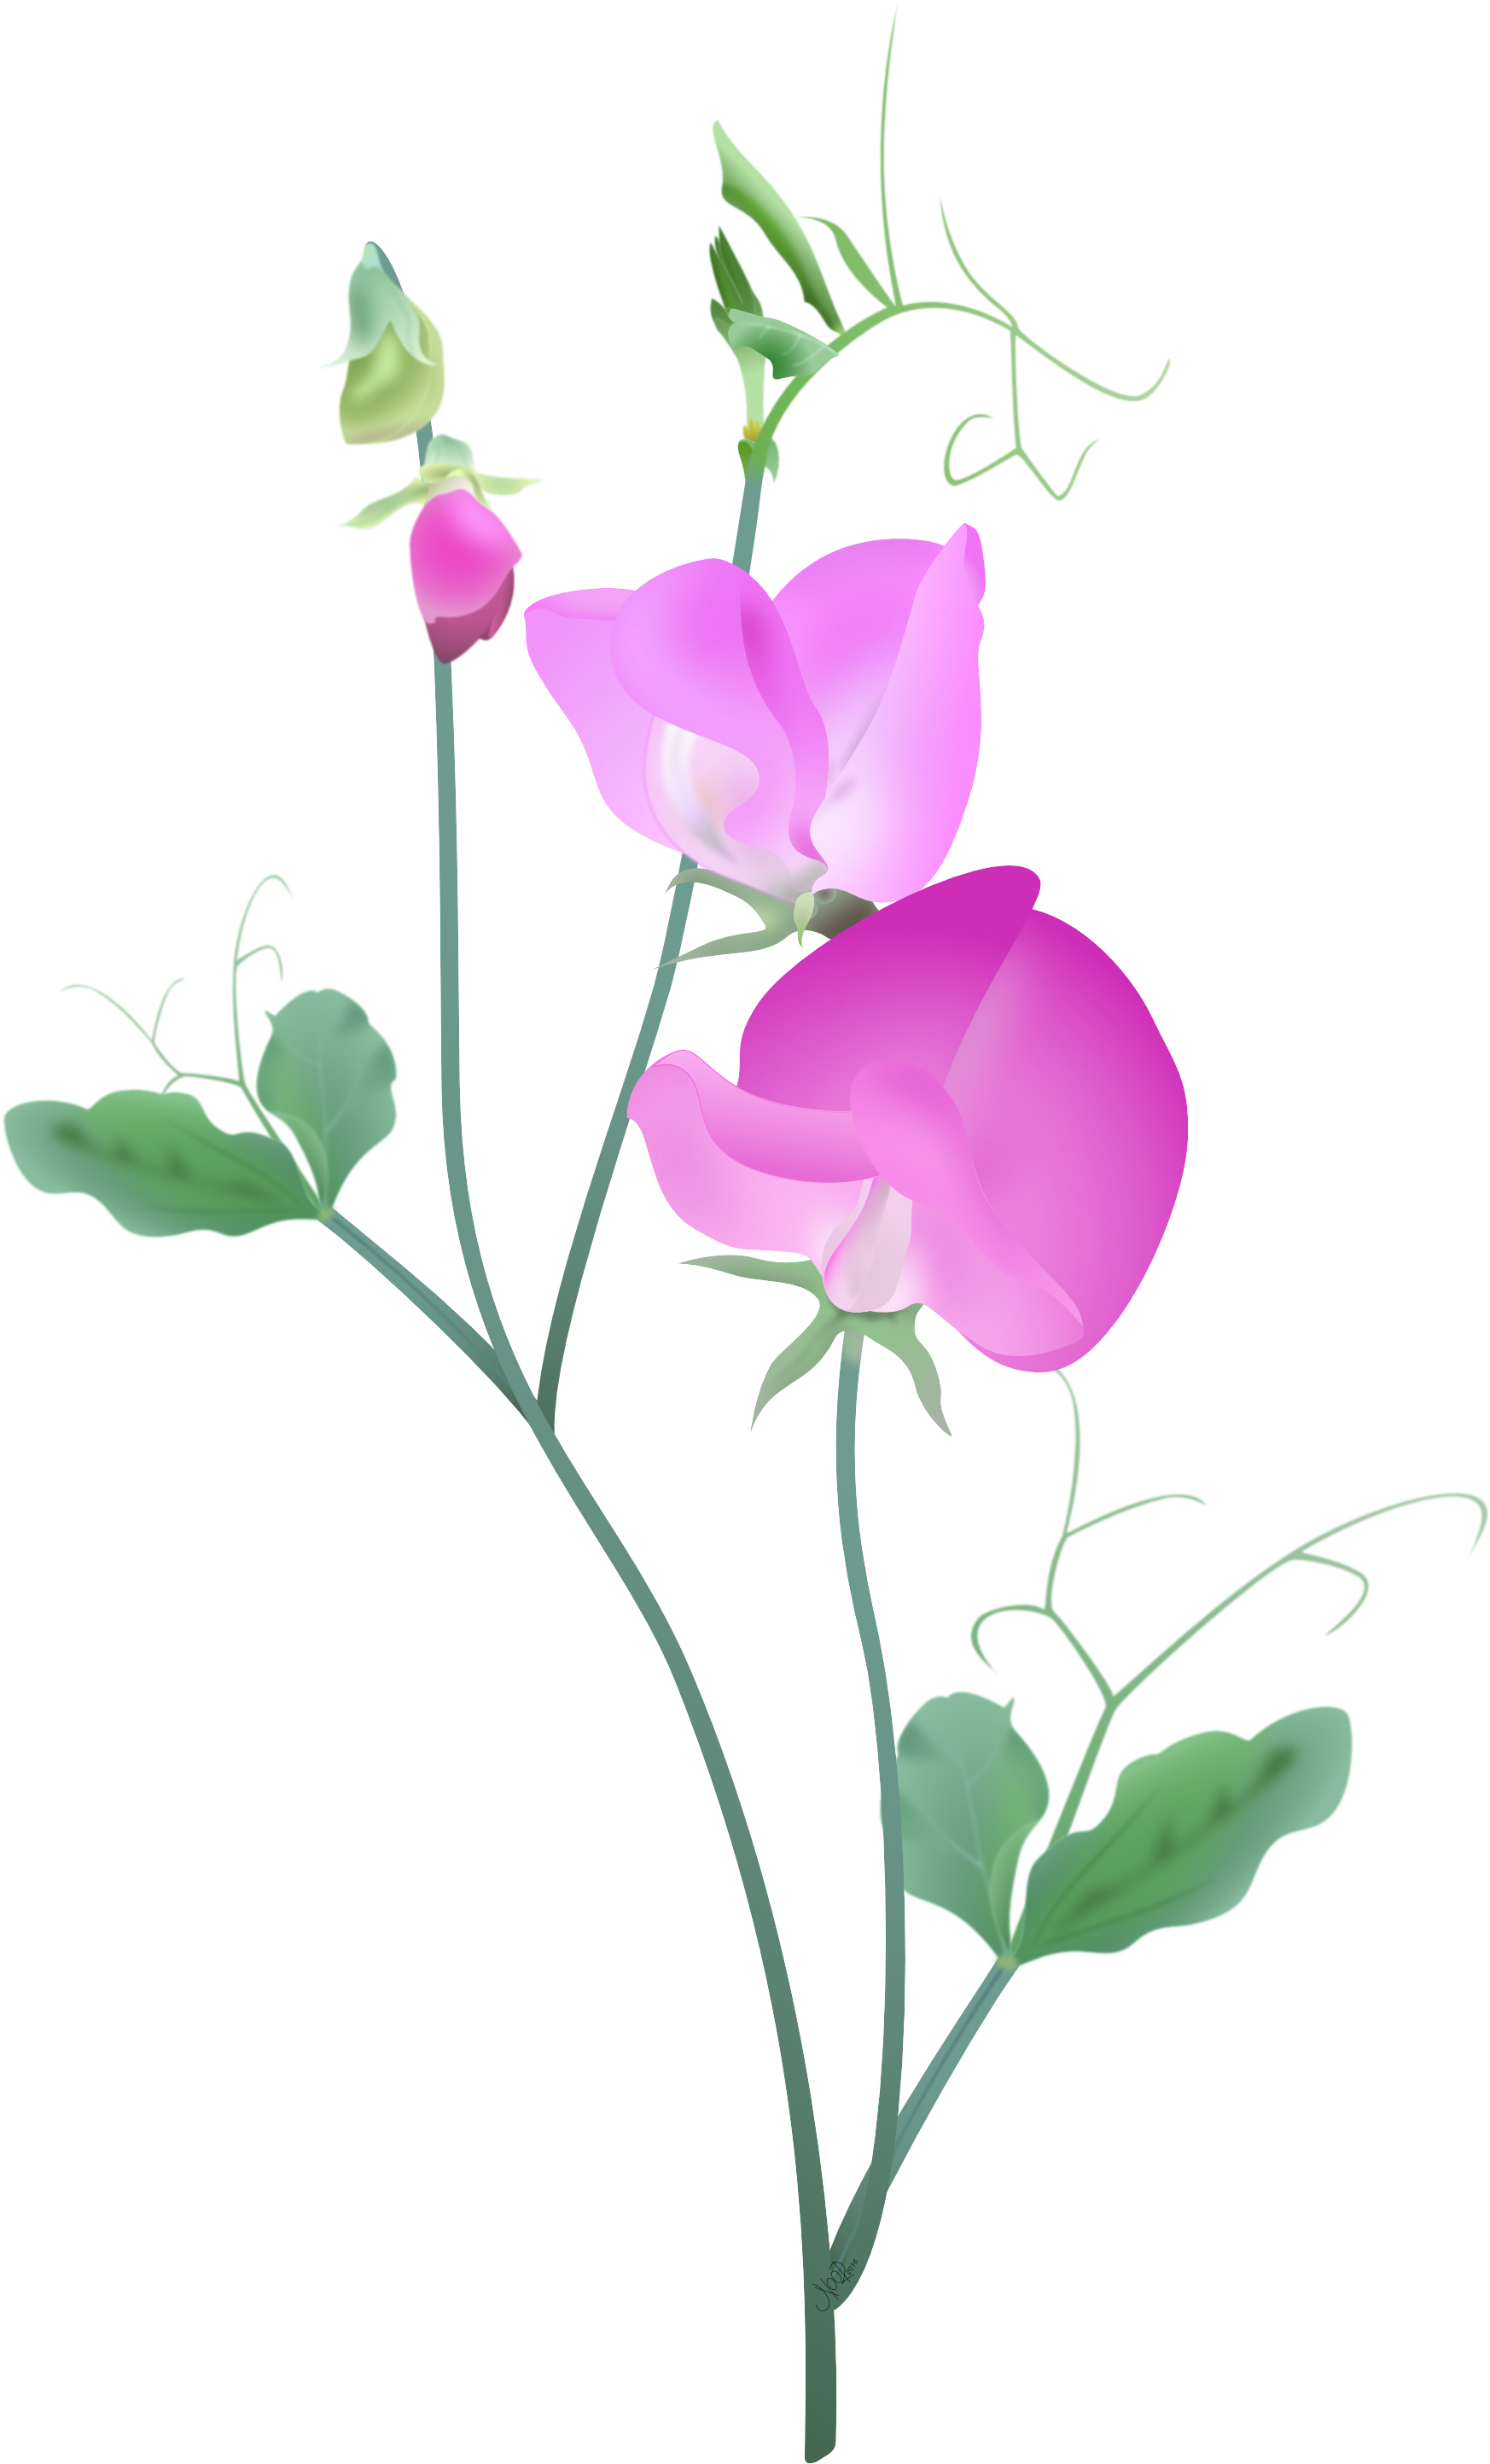 Pink and purple download. Peas clipart sweet pea